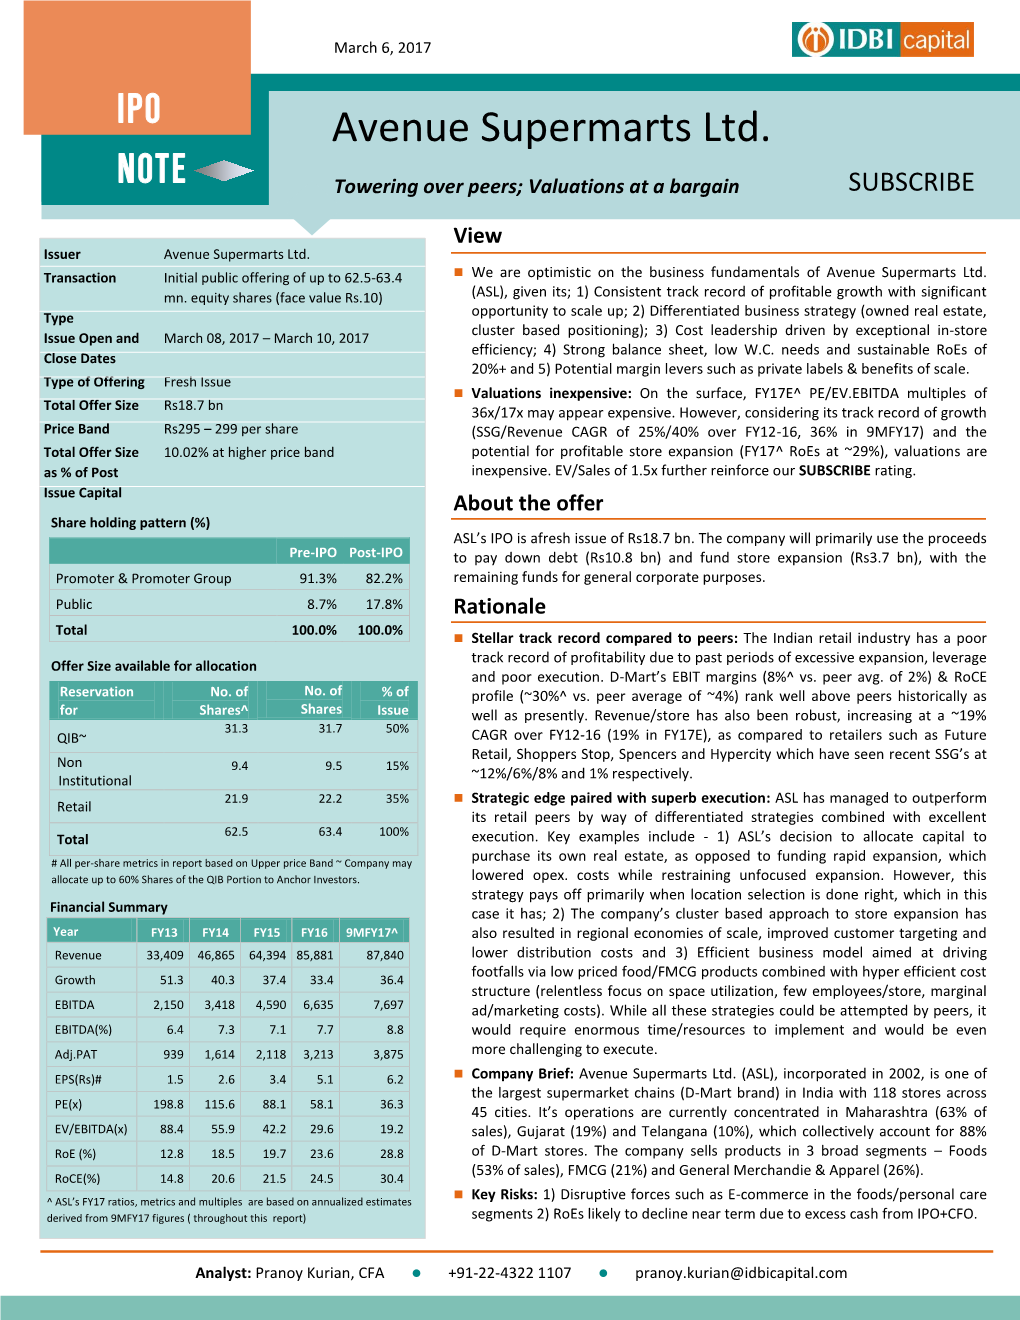 Avenue Supermarts Ltd. REPORTNOTE SUBSCRIBE Towering Over Peers; Valuations at a Bargain View Issuer Avenue Supermarts Ltd